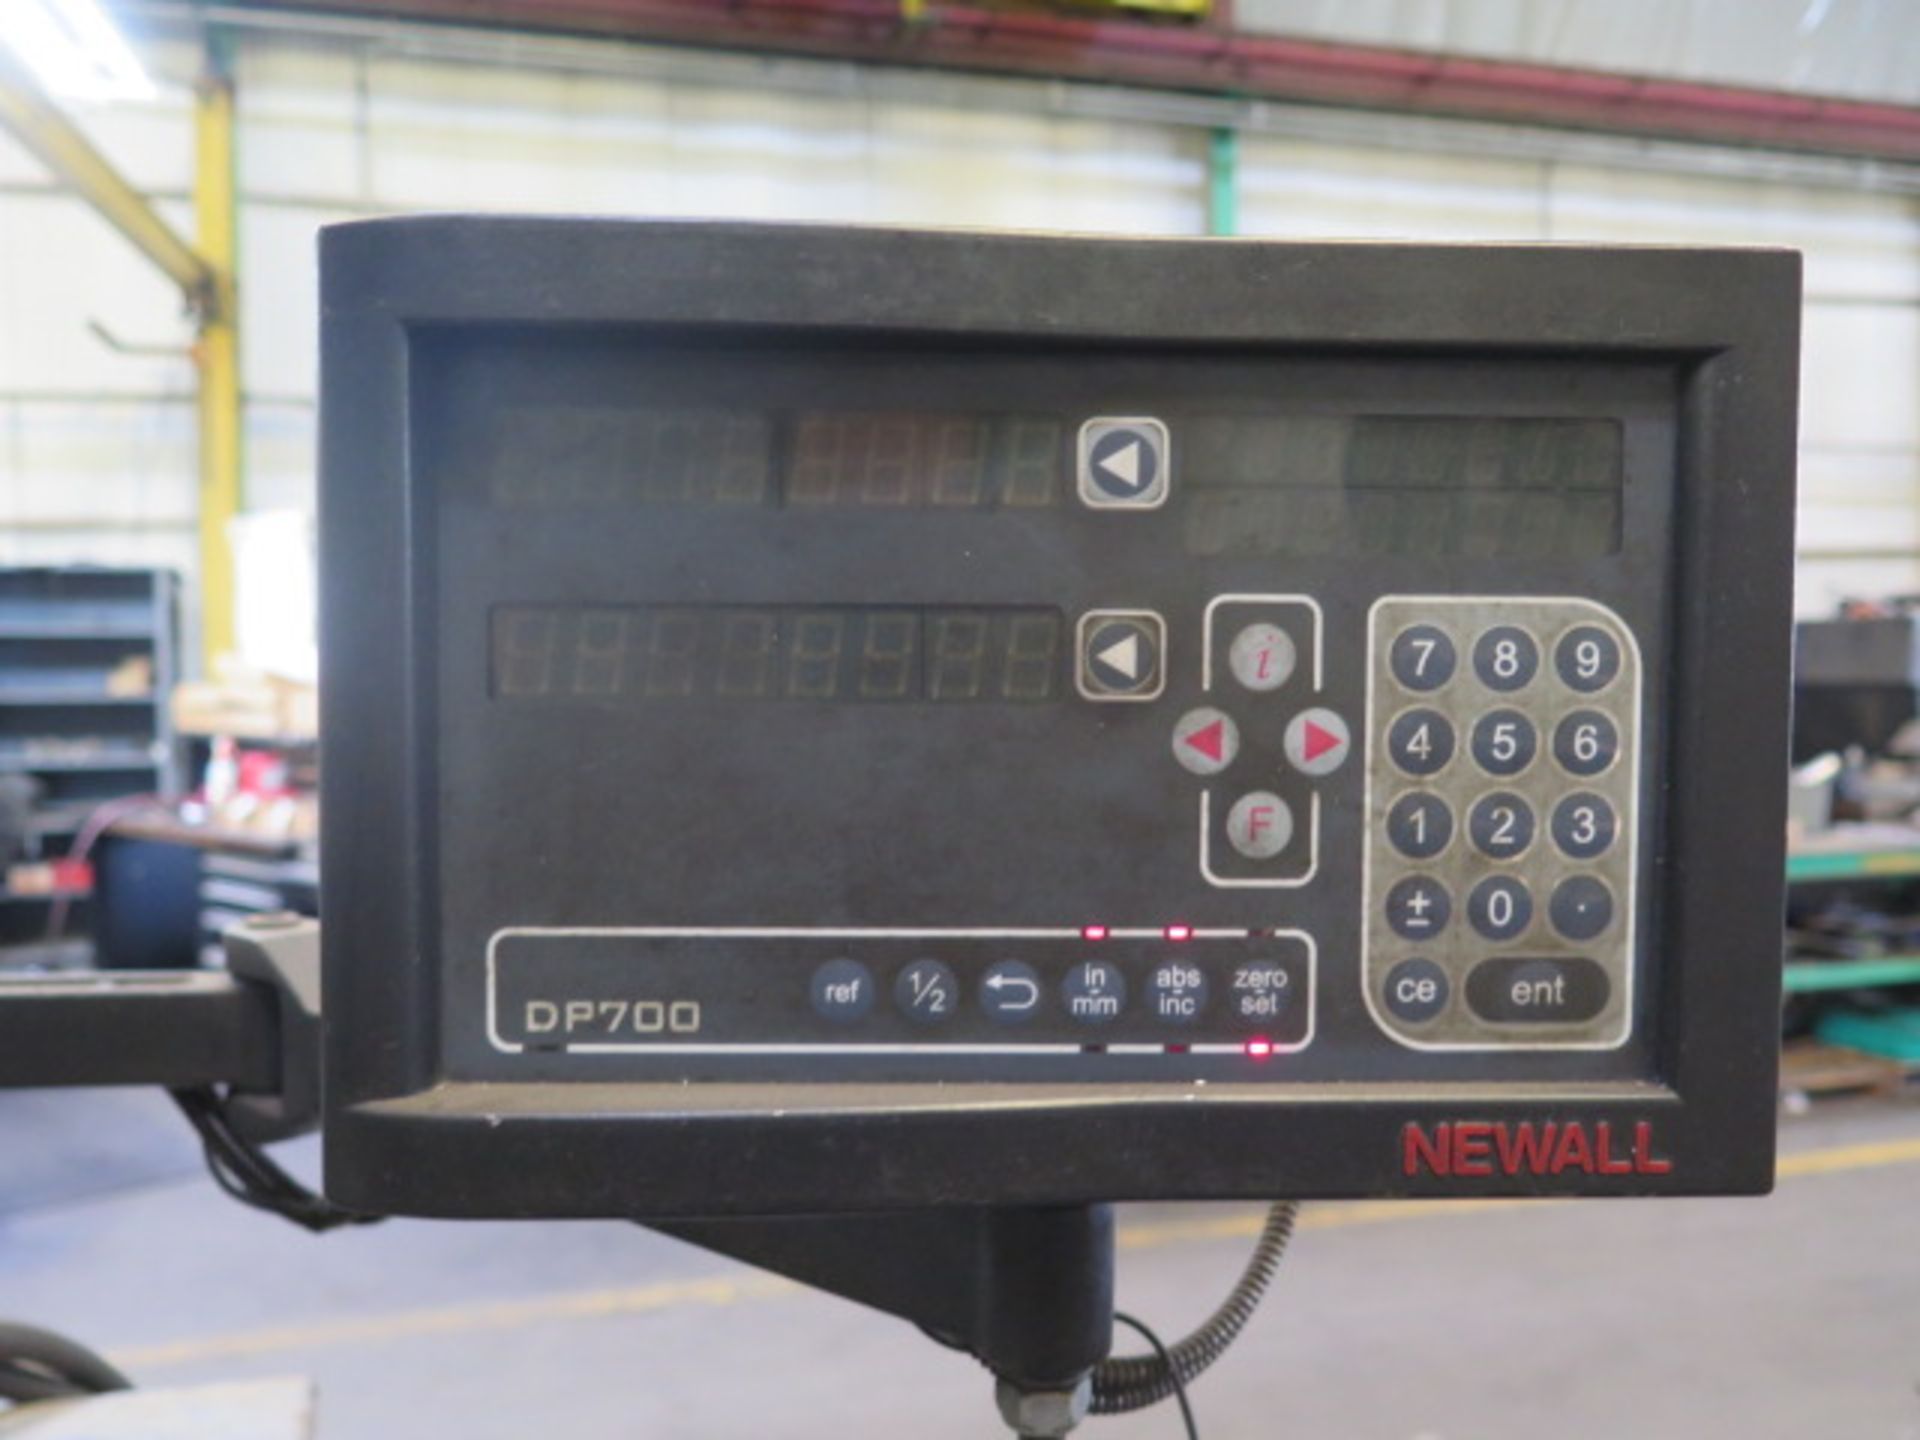 Chevalier Vertical Mill s/n 828286 w/ Newall DP700 Program DRO, 60-4500 Dial Change RPM, SOLD AS IS - Image 6 of 9